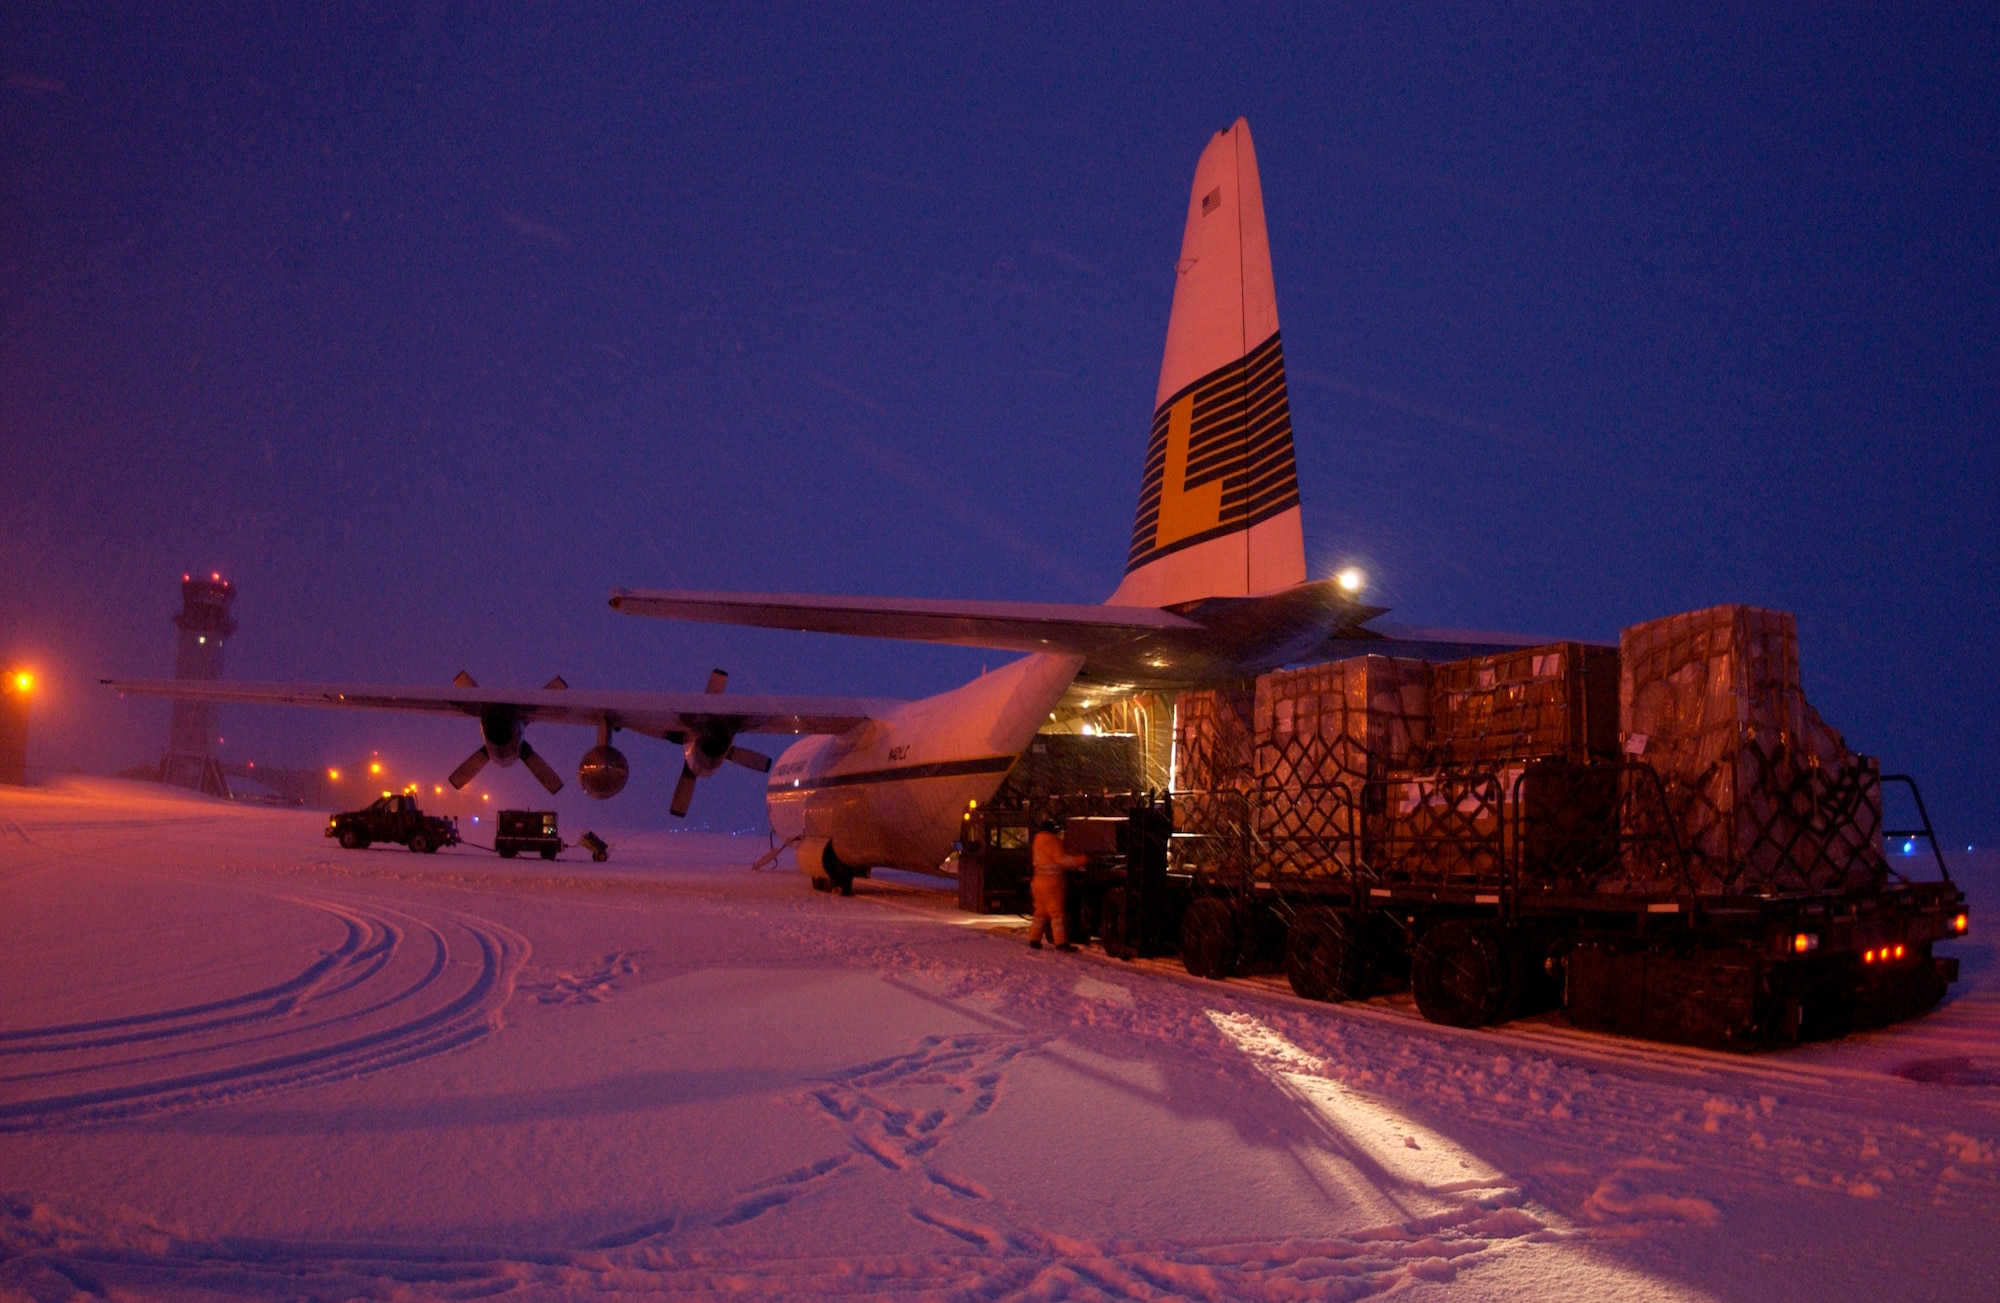 Airmen unload supplies for the base Jan. 25 at Thule Air Base, Greenland. The supplies are flown in on a weekly contracted L-100 aircraft from McGuire Air Force Base, N.J.  (U.S. Air Force photo/Michael Tolzmann) 
